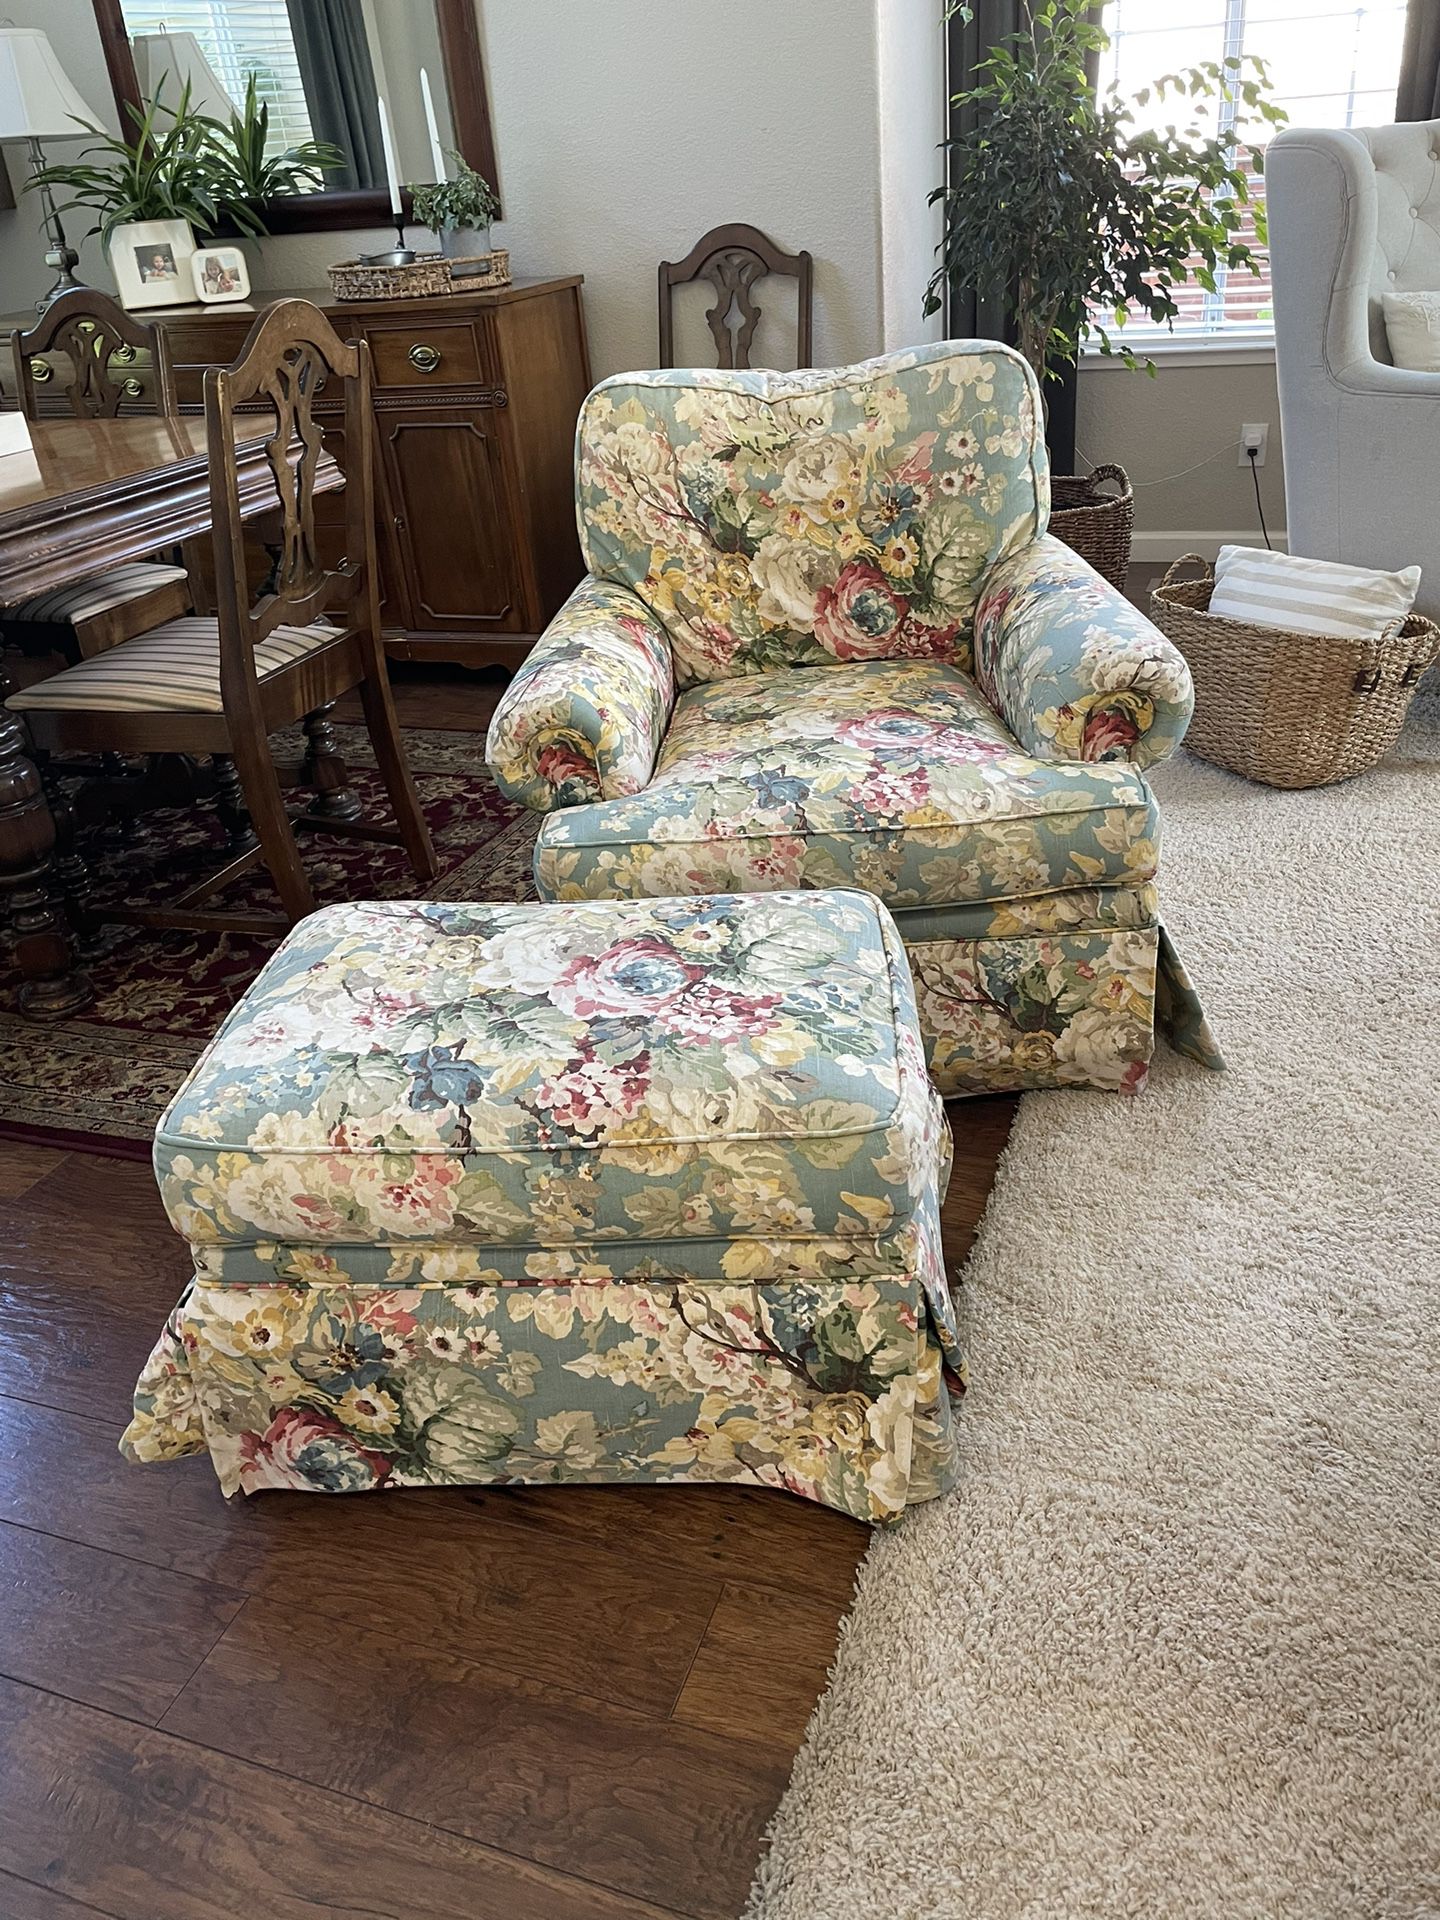 Upholstered Chair And Ottoman 